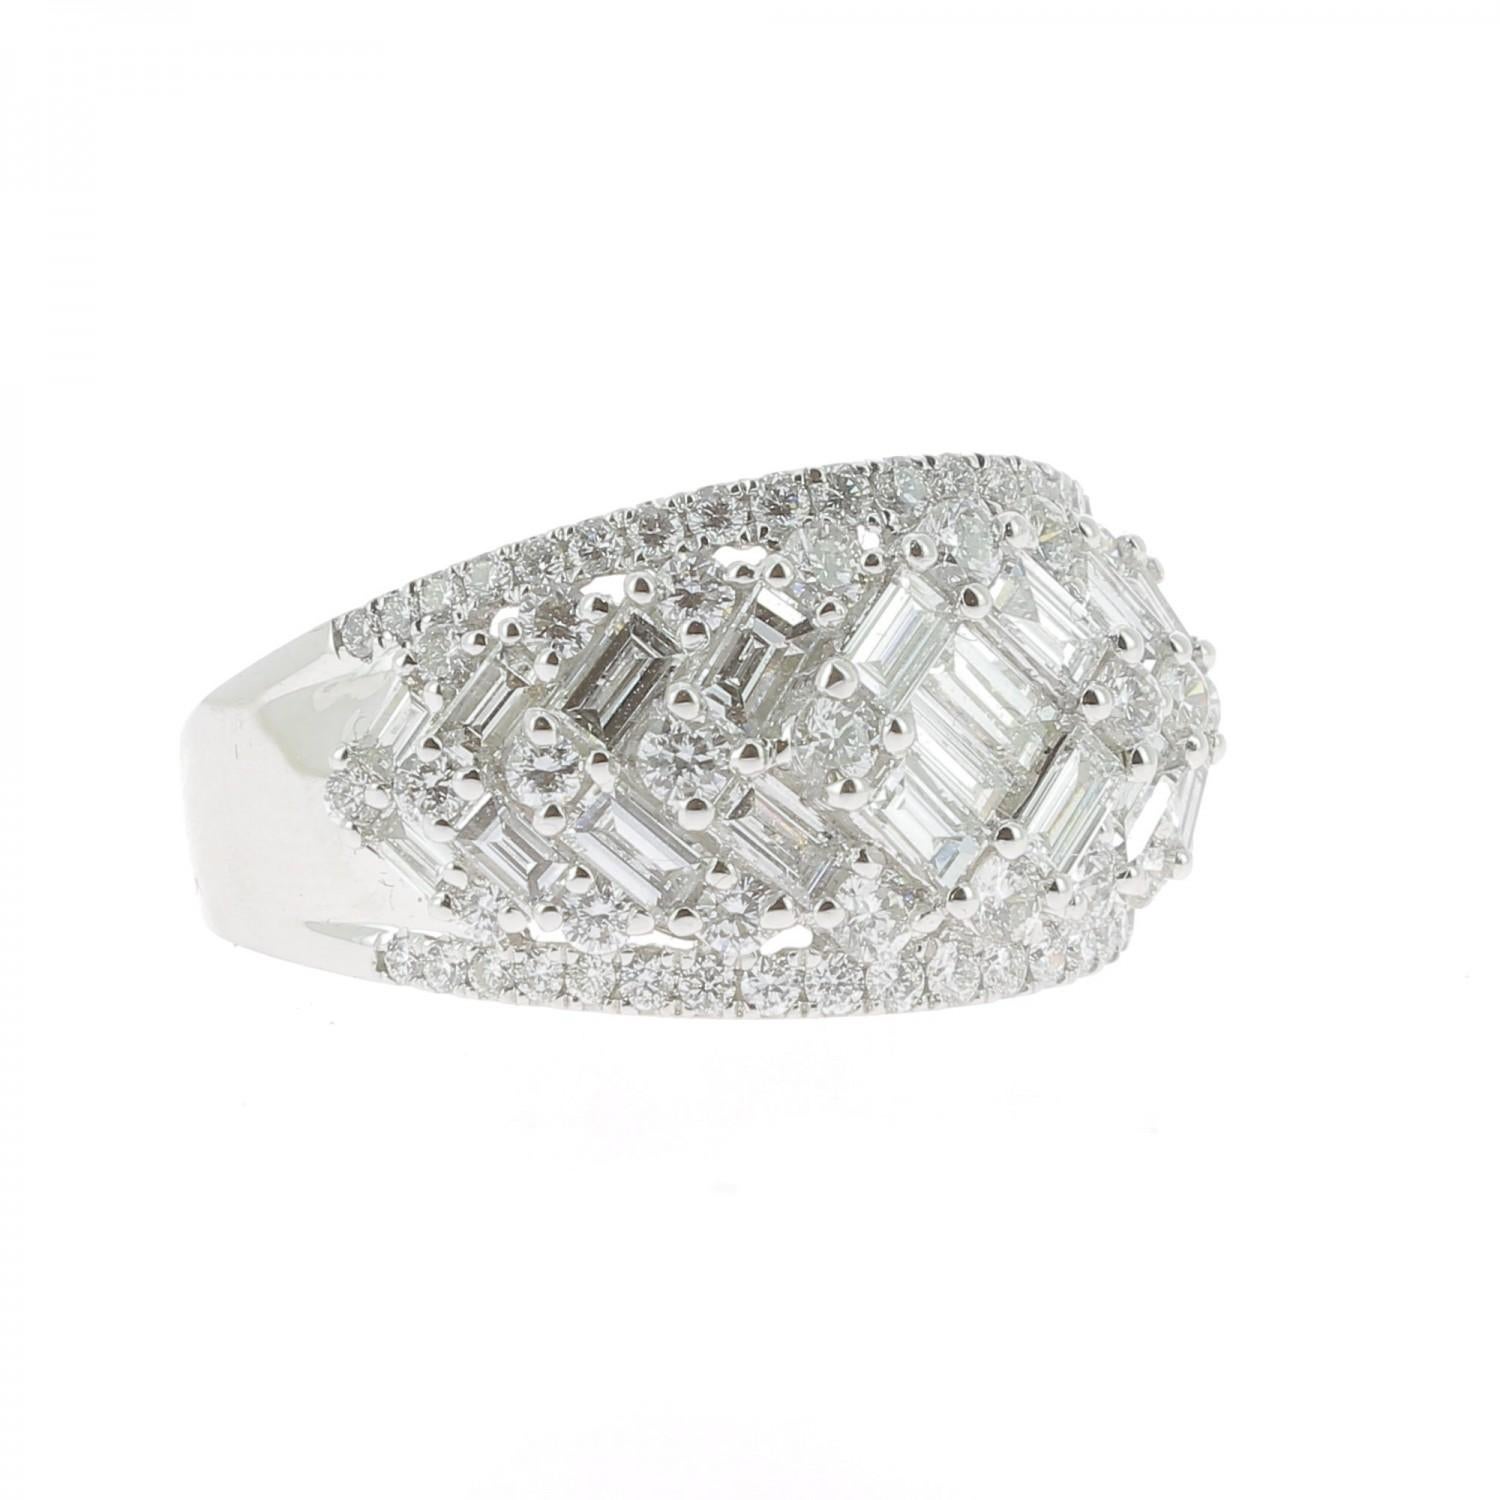 A wonderful Diamond Dome Ring set with Round and Baguettes Diamonds weighing 2.08 Carats. 
The Diamond Dome Ring is set in 18K White Gold, weighing 7.14 Grams
The Cocktail rings is made to order, which means after receiving the order, we will